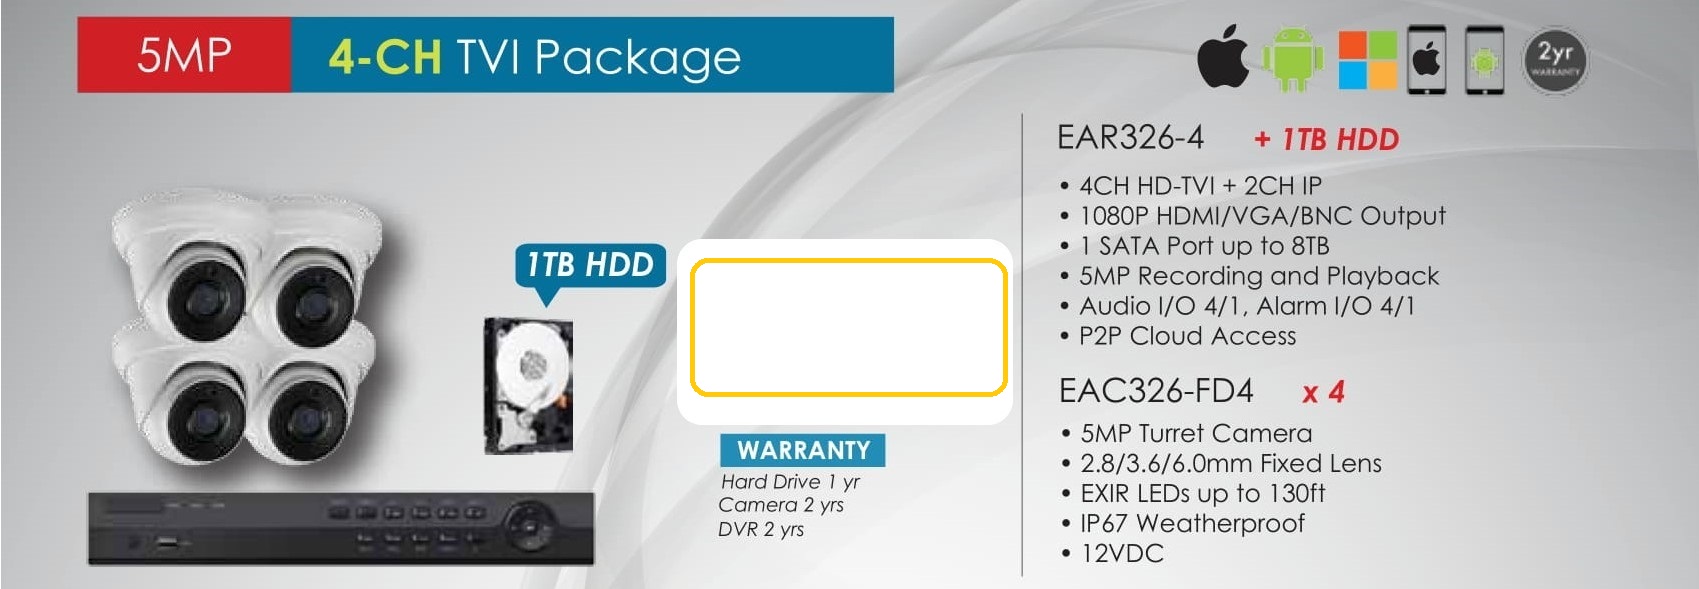 5mp-4ch-pack-1 New Packages - No Price